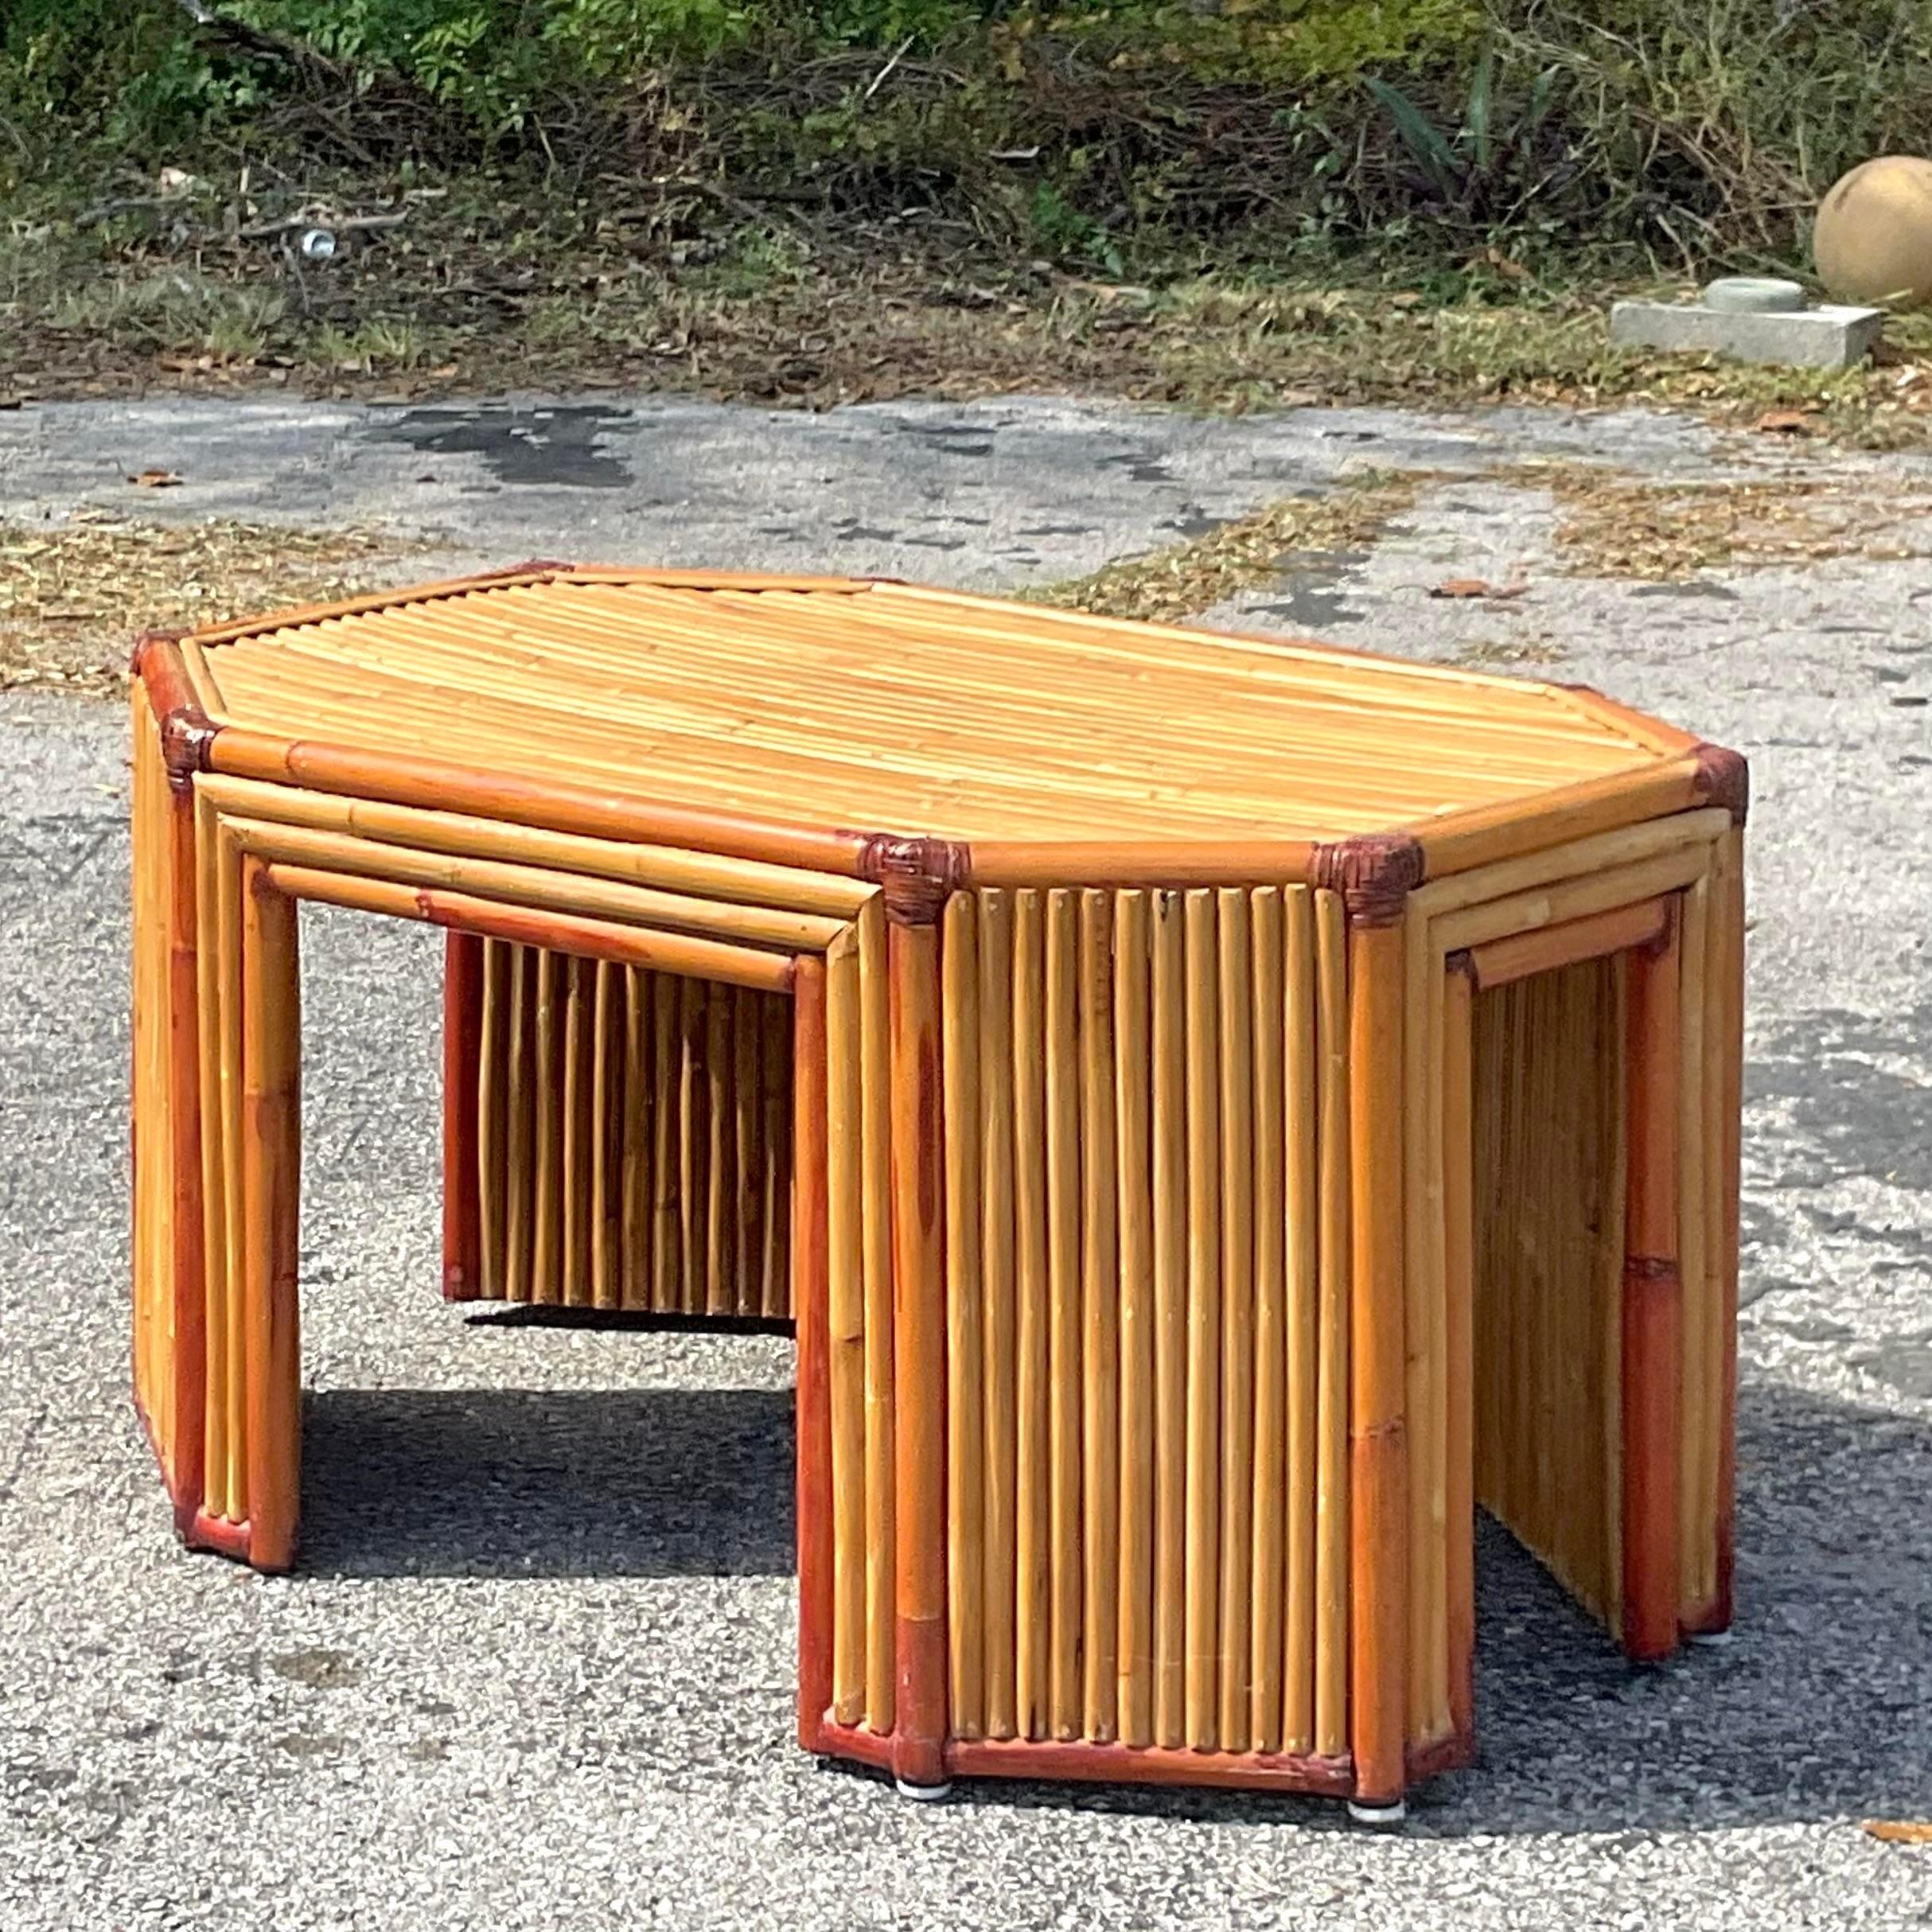 A fabulous vintage Coastal rattan coffee table. A chic faceted octagon shape in thick rattan trimmed in bamboo. A super stylish table. Acquired from a Palm Beach estate.